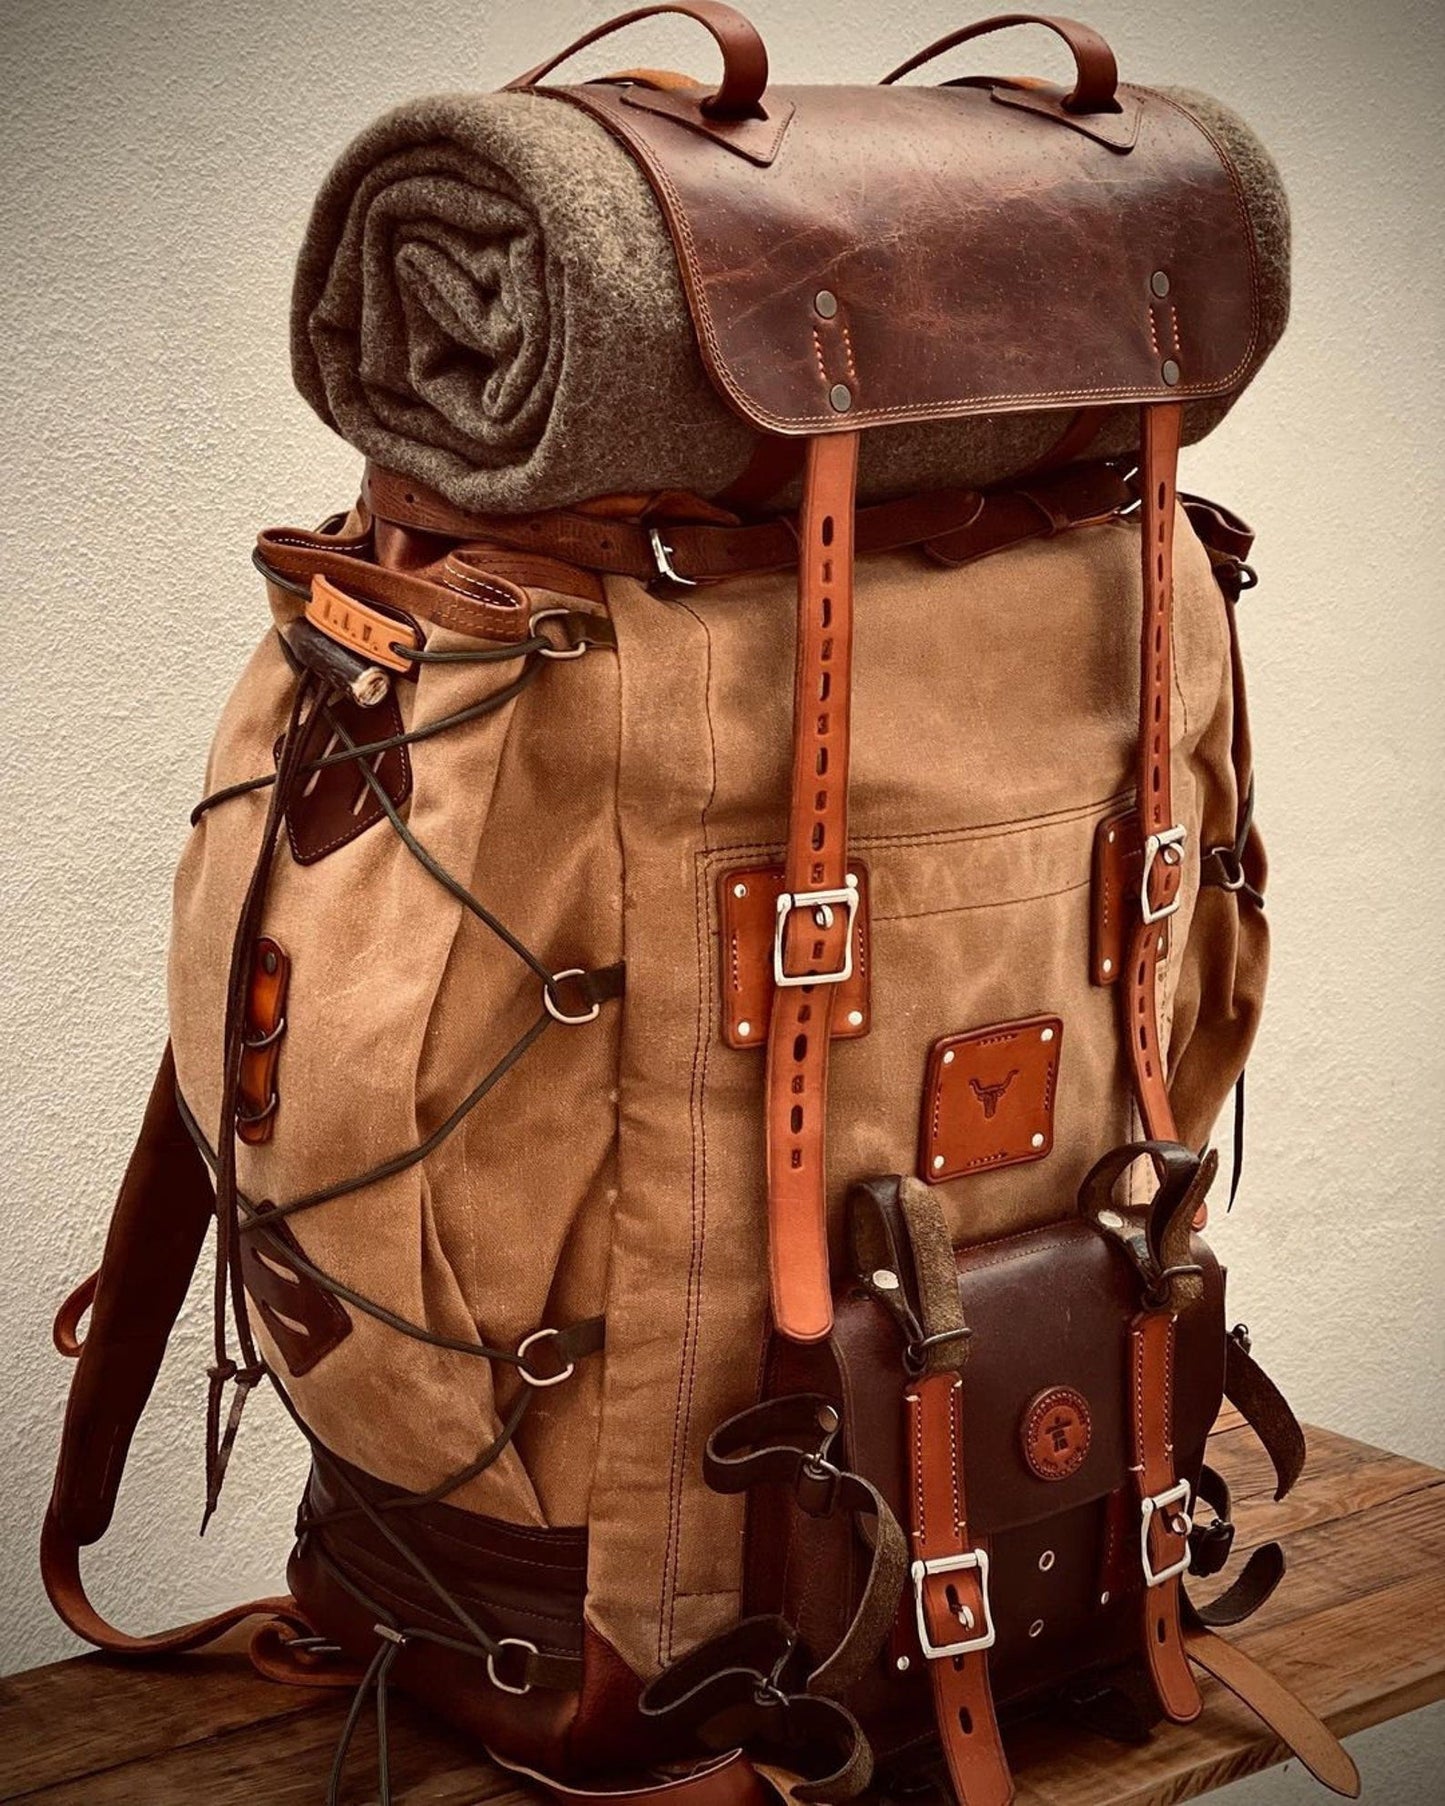 200USD Discount | Bushcraft Design Finalist | Handmade Leather and Canvas Backpack for Travel, Camping,Military | 45 Liter | Personalization bushcraft - camping - hiking backpack 99percenthandmade   